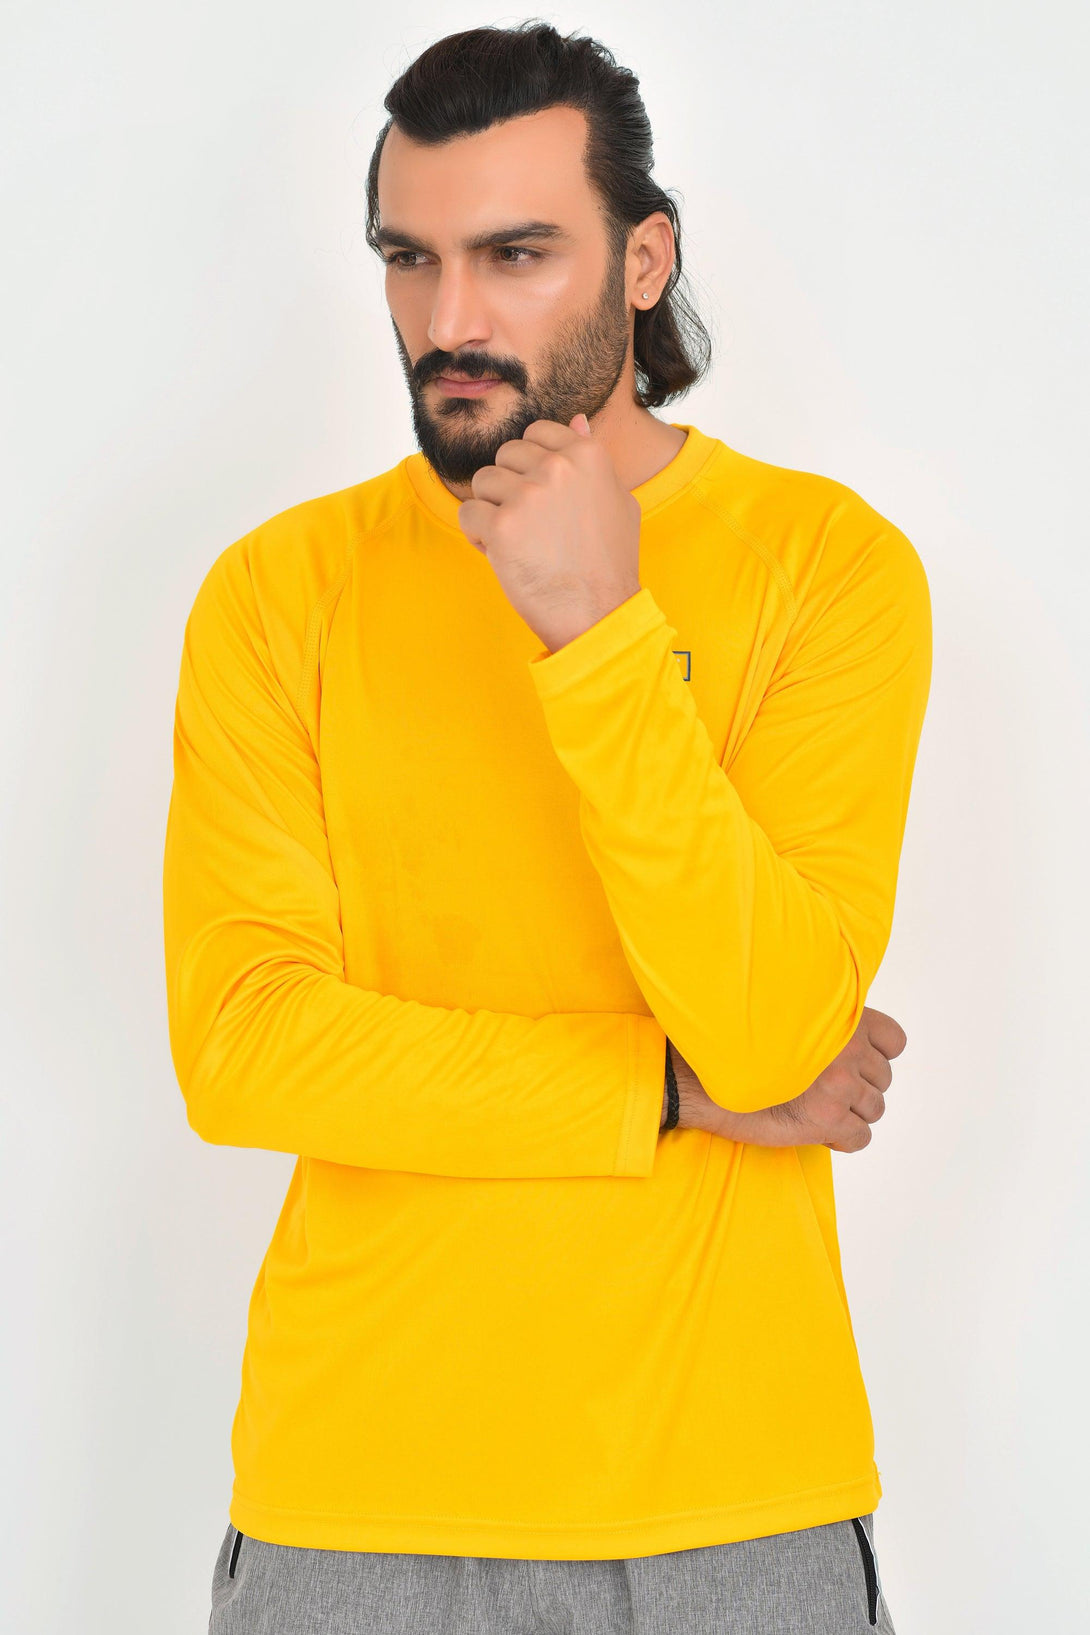 Polyester Full sleeve T-Shirts | YELLOW - LIGHT GREY - Pack of 2 - FTS